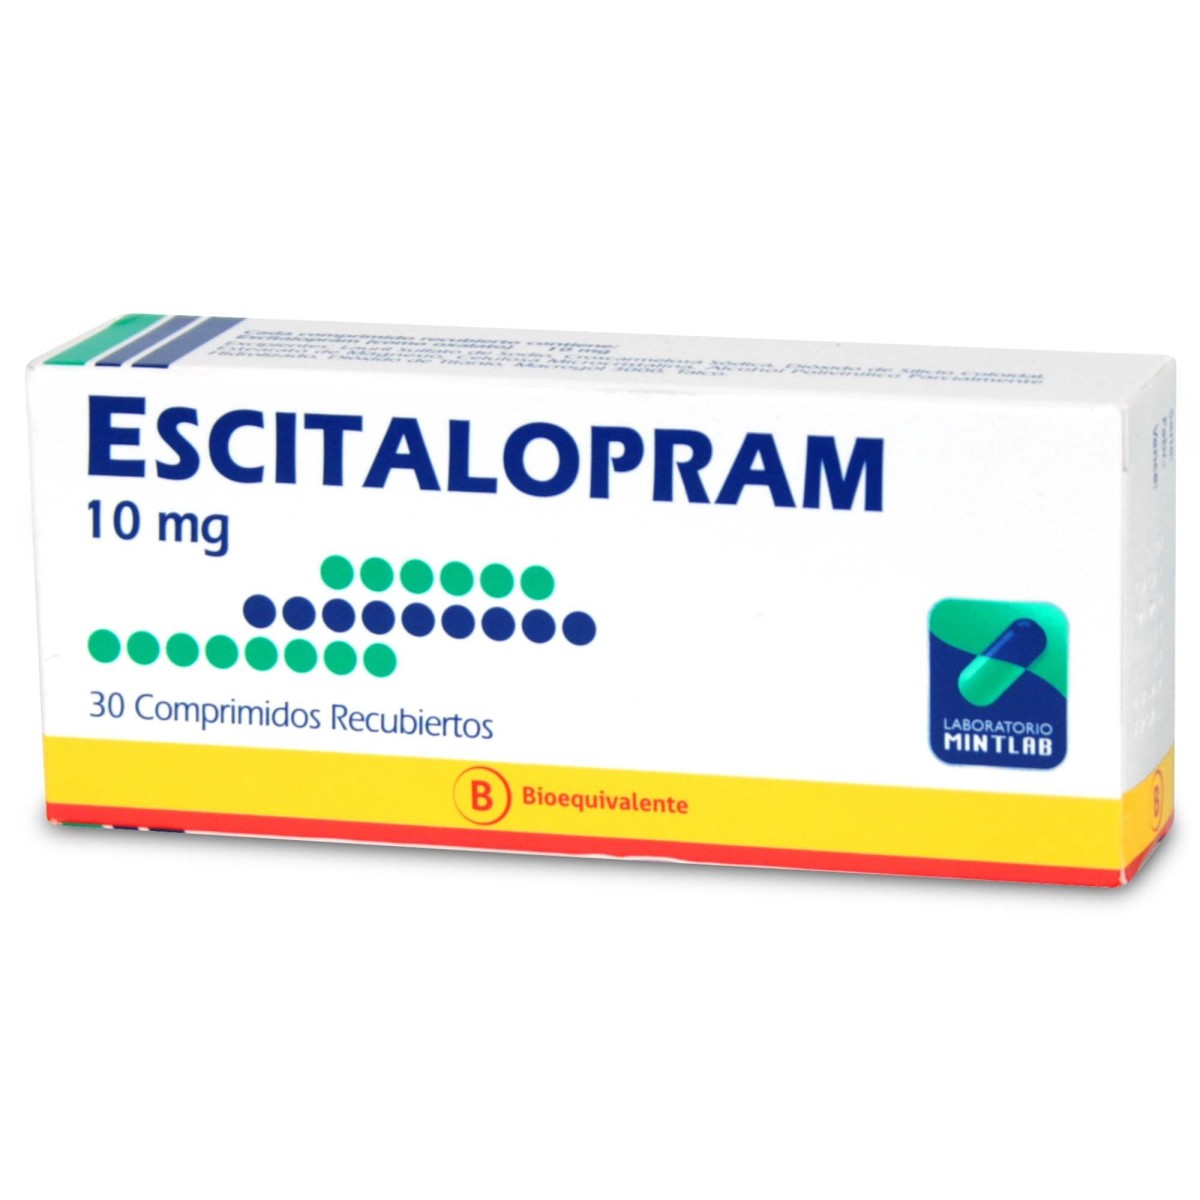 my-experience-with-cipralex-escitalopram-a-very-heavy-period-and-hair-loss